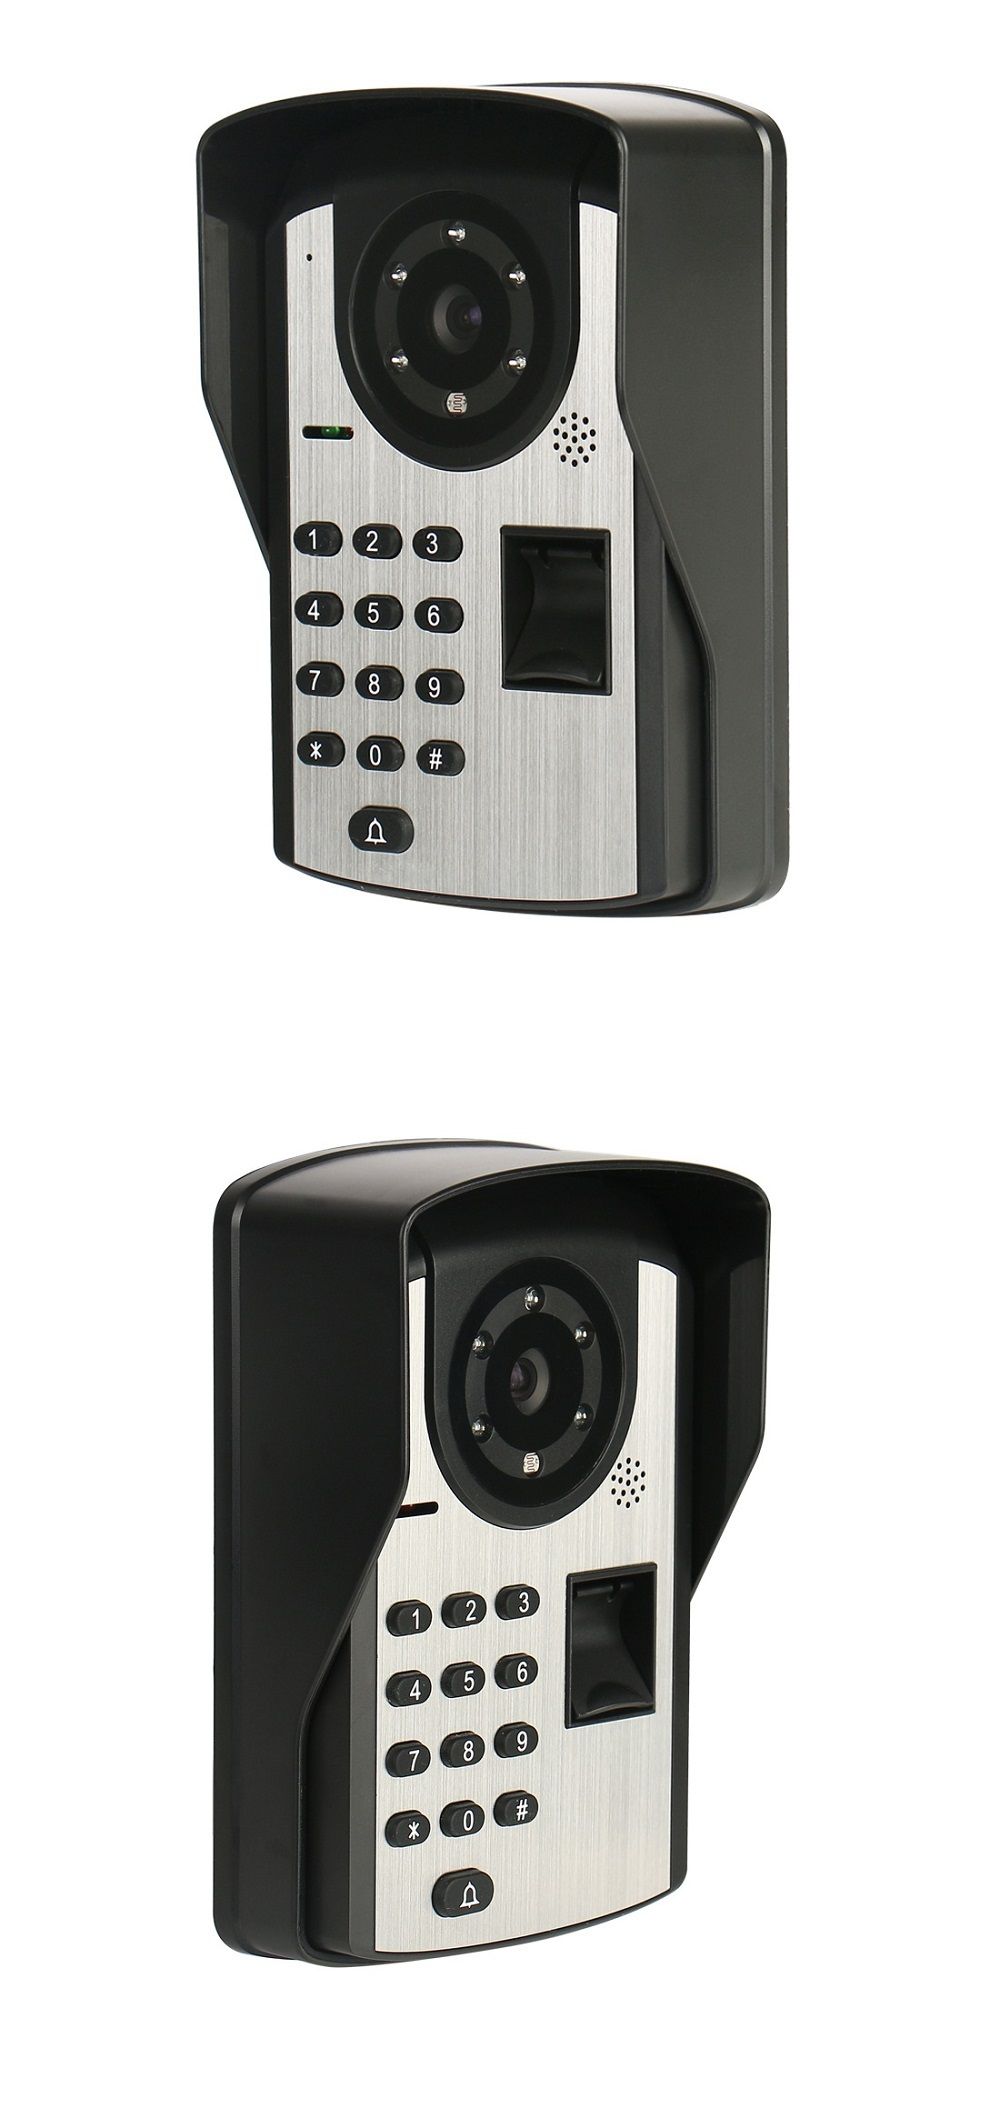 ENNIO-7-Inch-Capacitive-Touch-Wifi-Wired-Video-Doorbell-Video-Camera-Phone-Remote-Fingerprint-Passwo-1619299